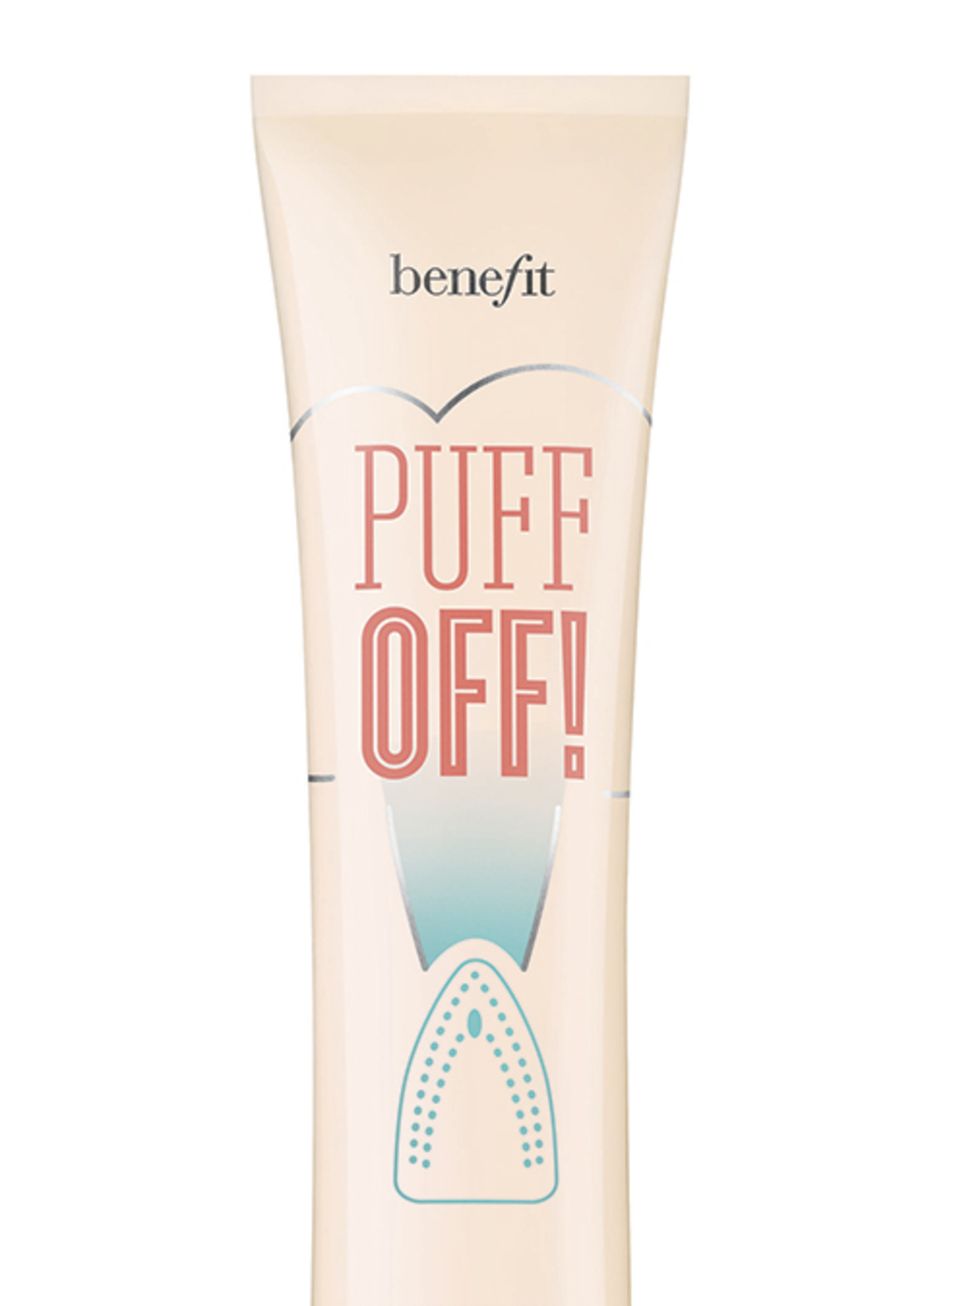 <p>Benefit Puff Off, £22.50</p>

<p>Dab a small amount of this under your eyes to hide dark circles, nourish and brighten. You'll look full rested and de-puffed in no time. </p>